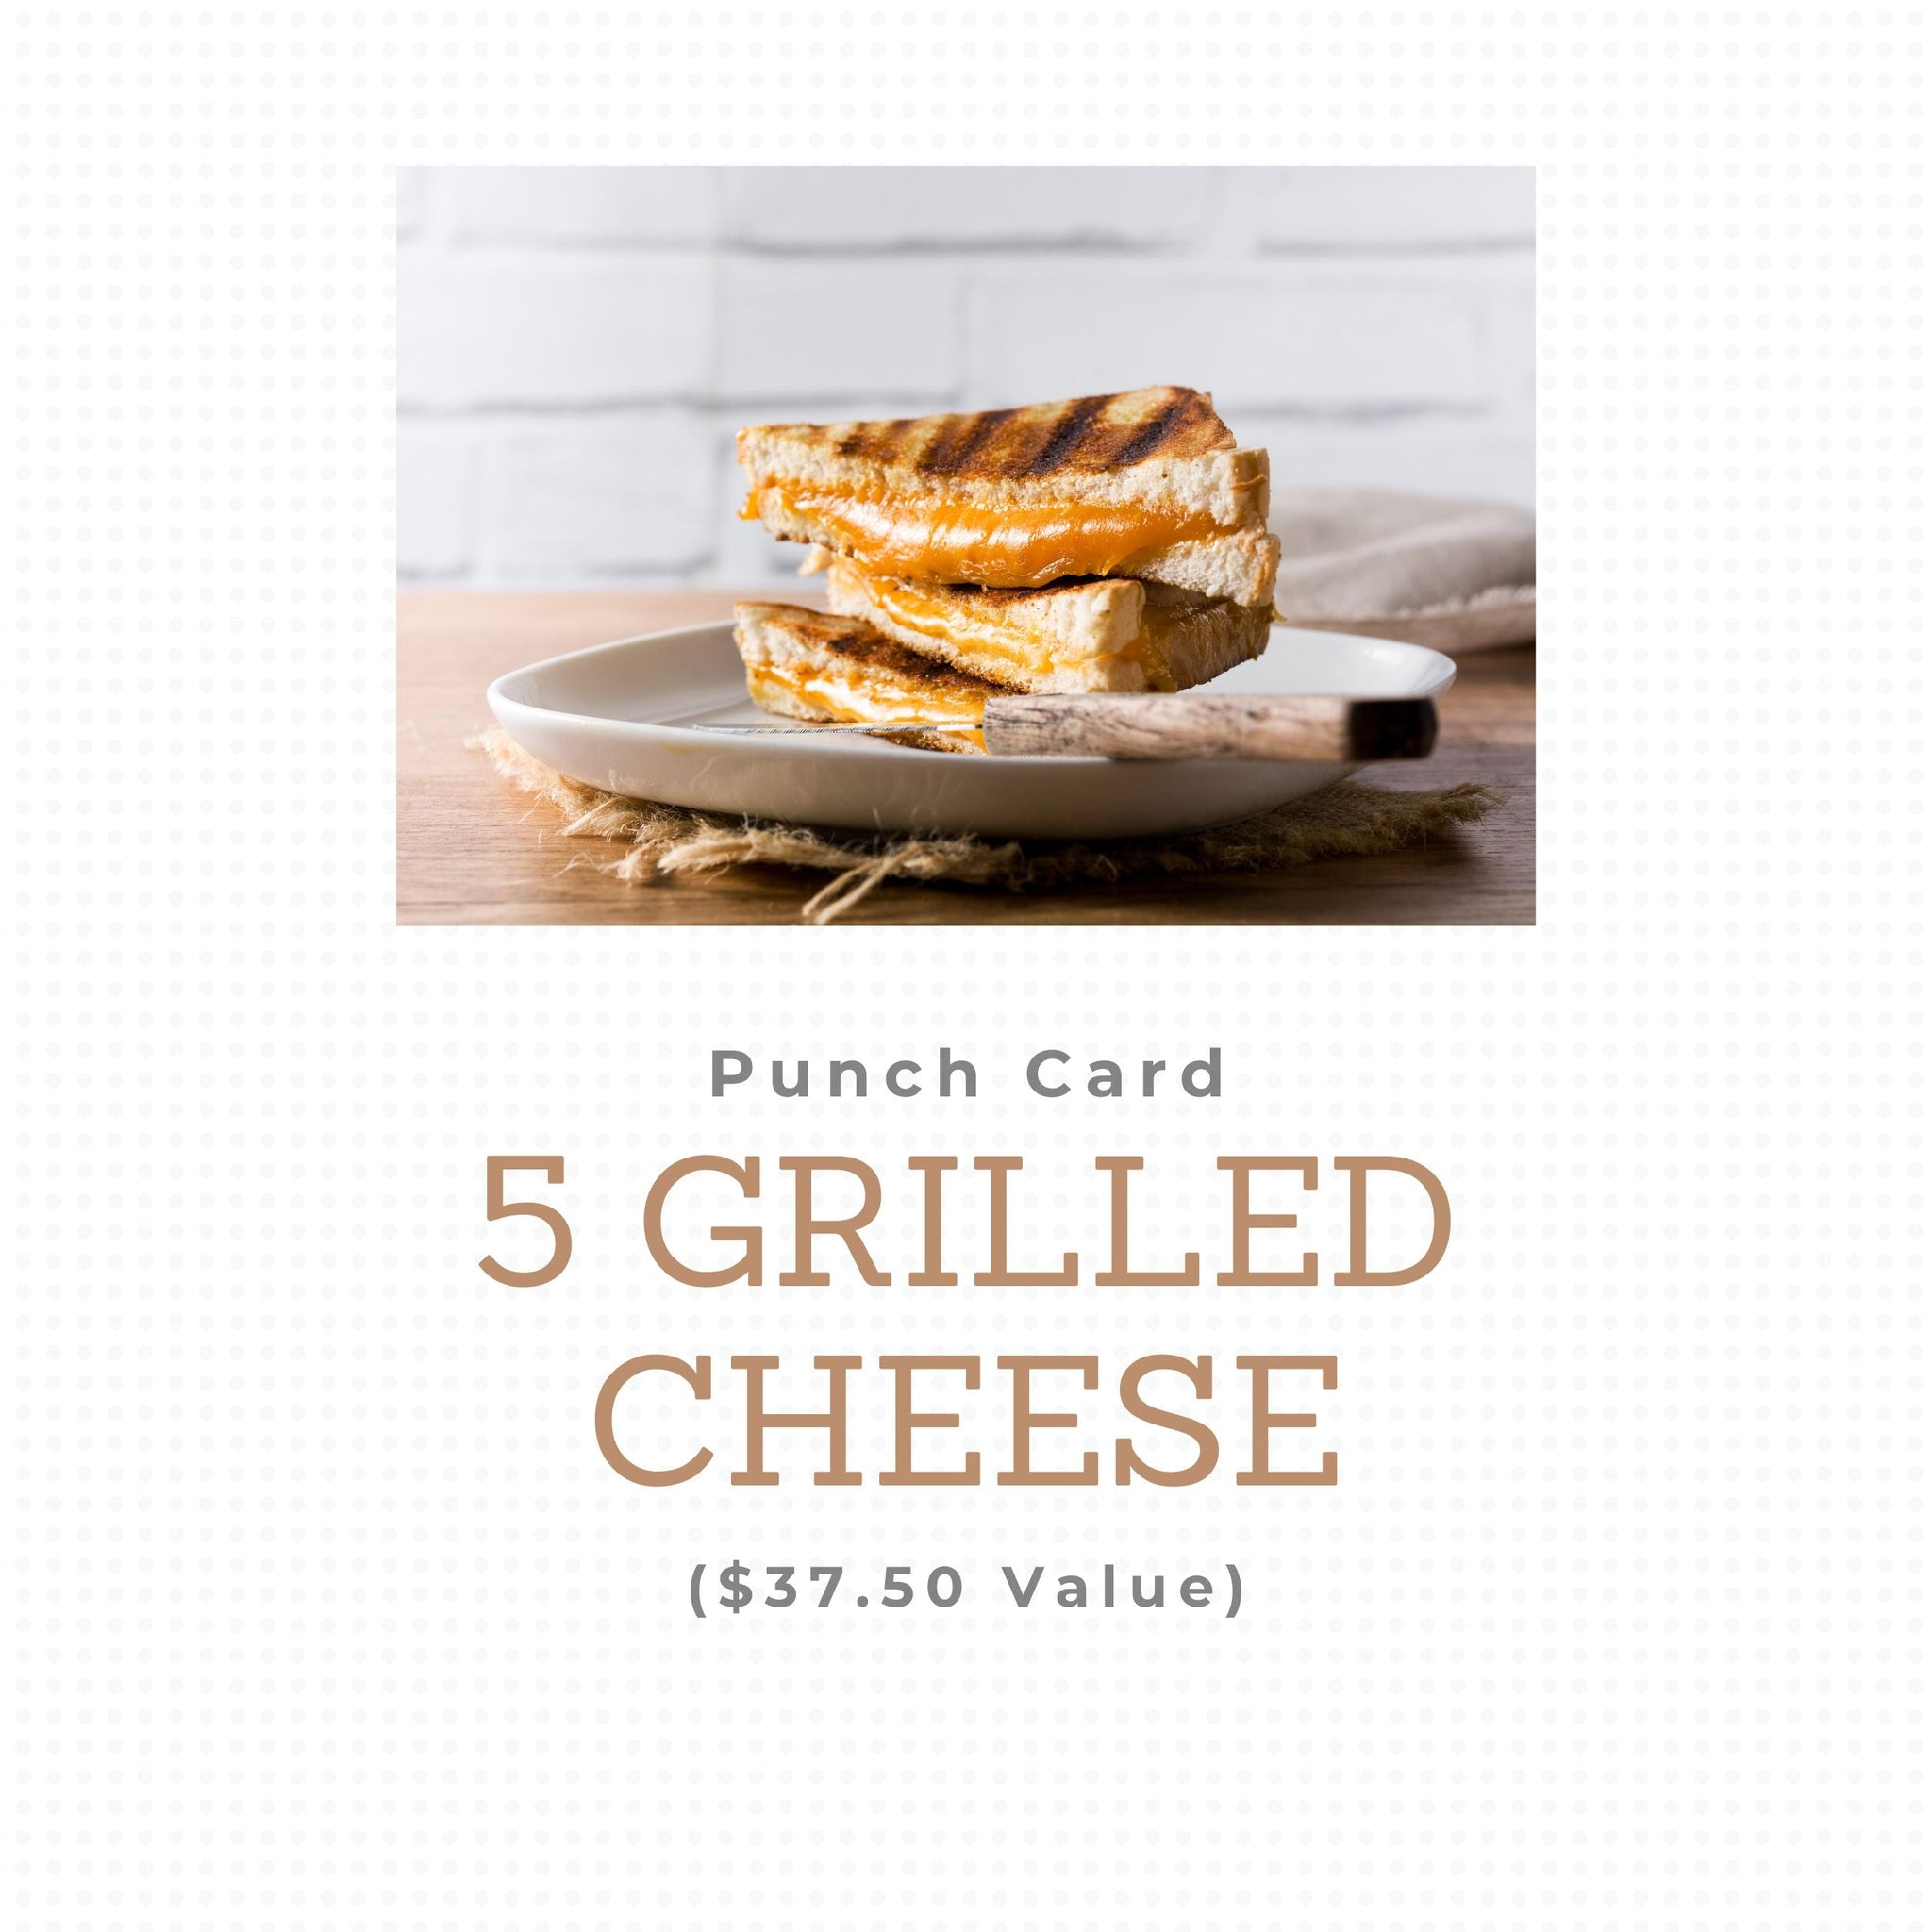 Grilled Cheese - 5 Prepaid Punch Card